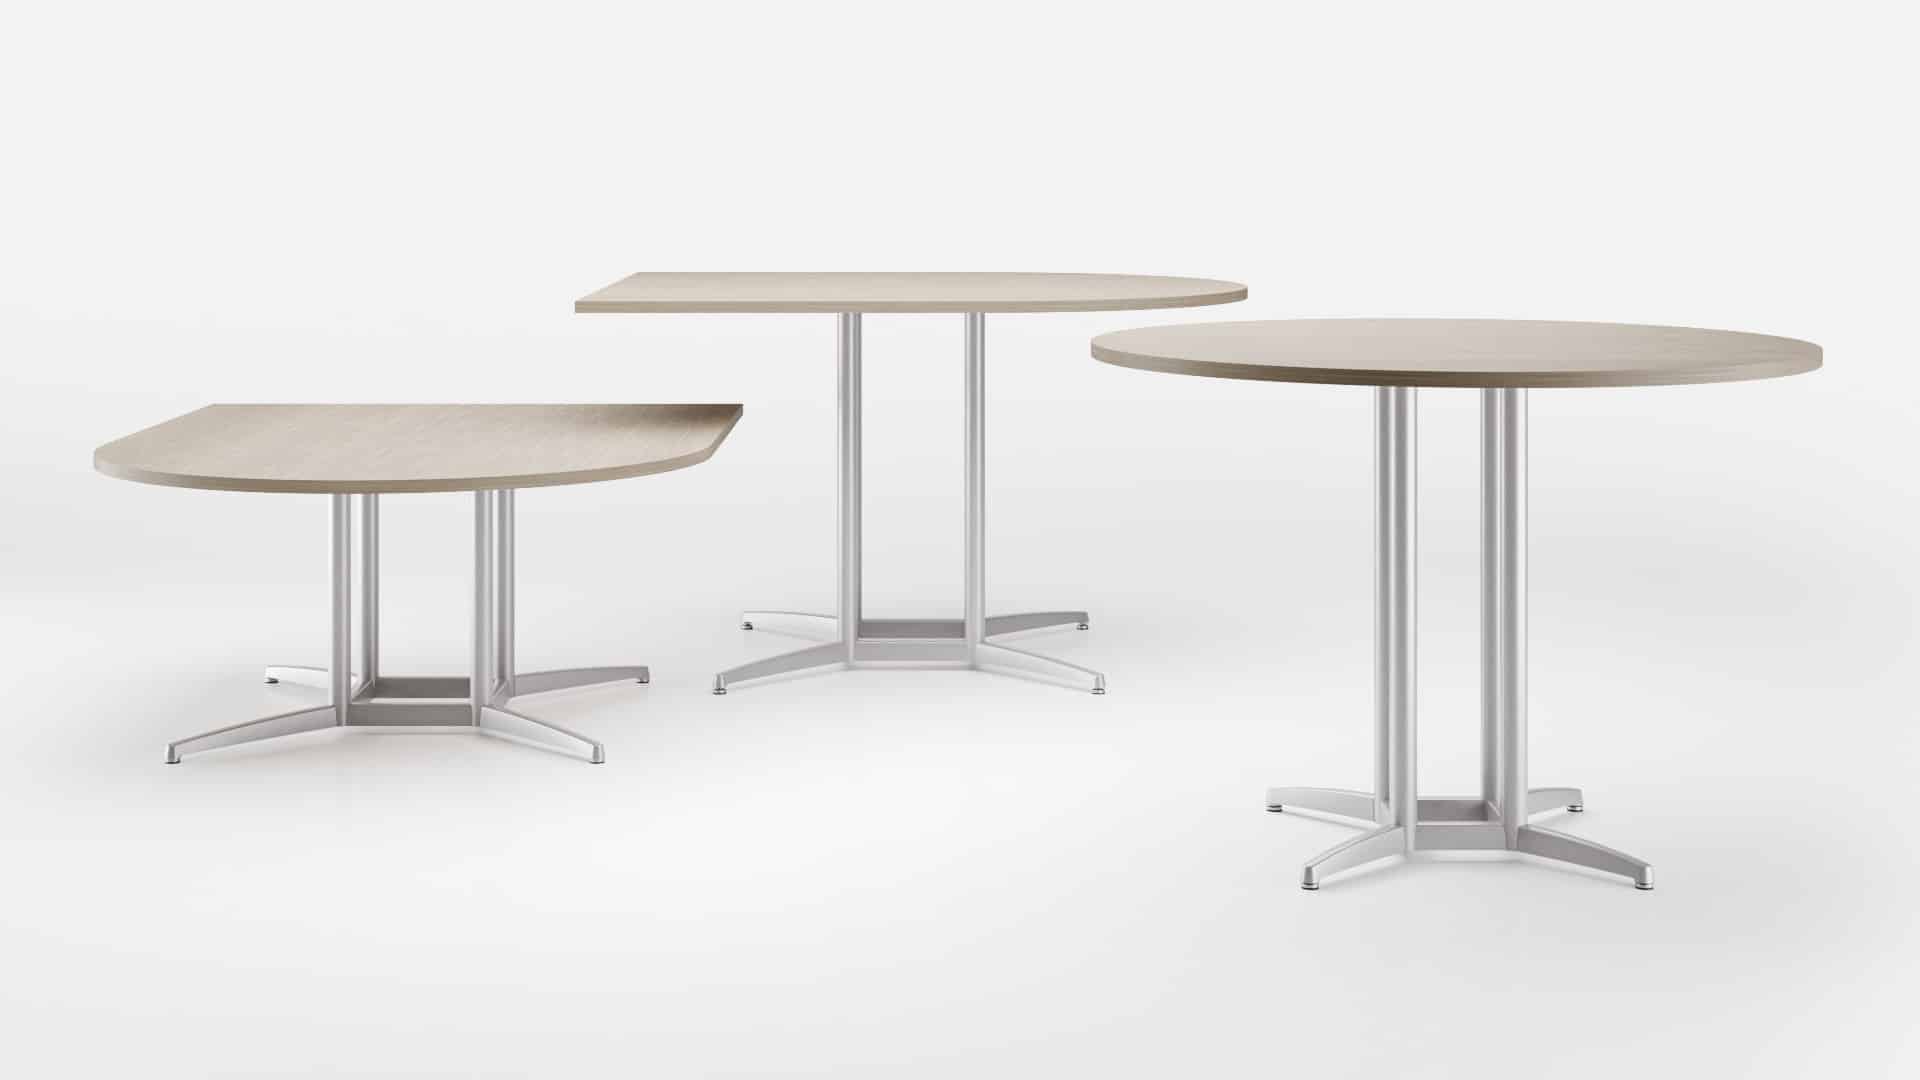 Supreme collaboration, rounded, circular tables